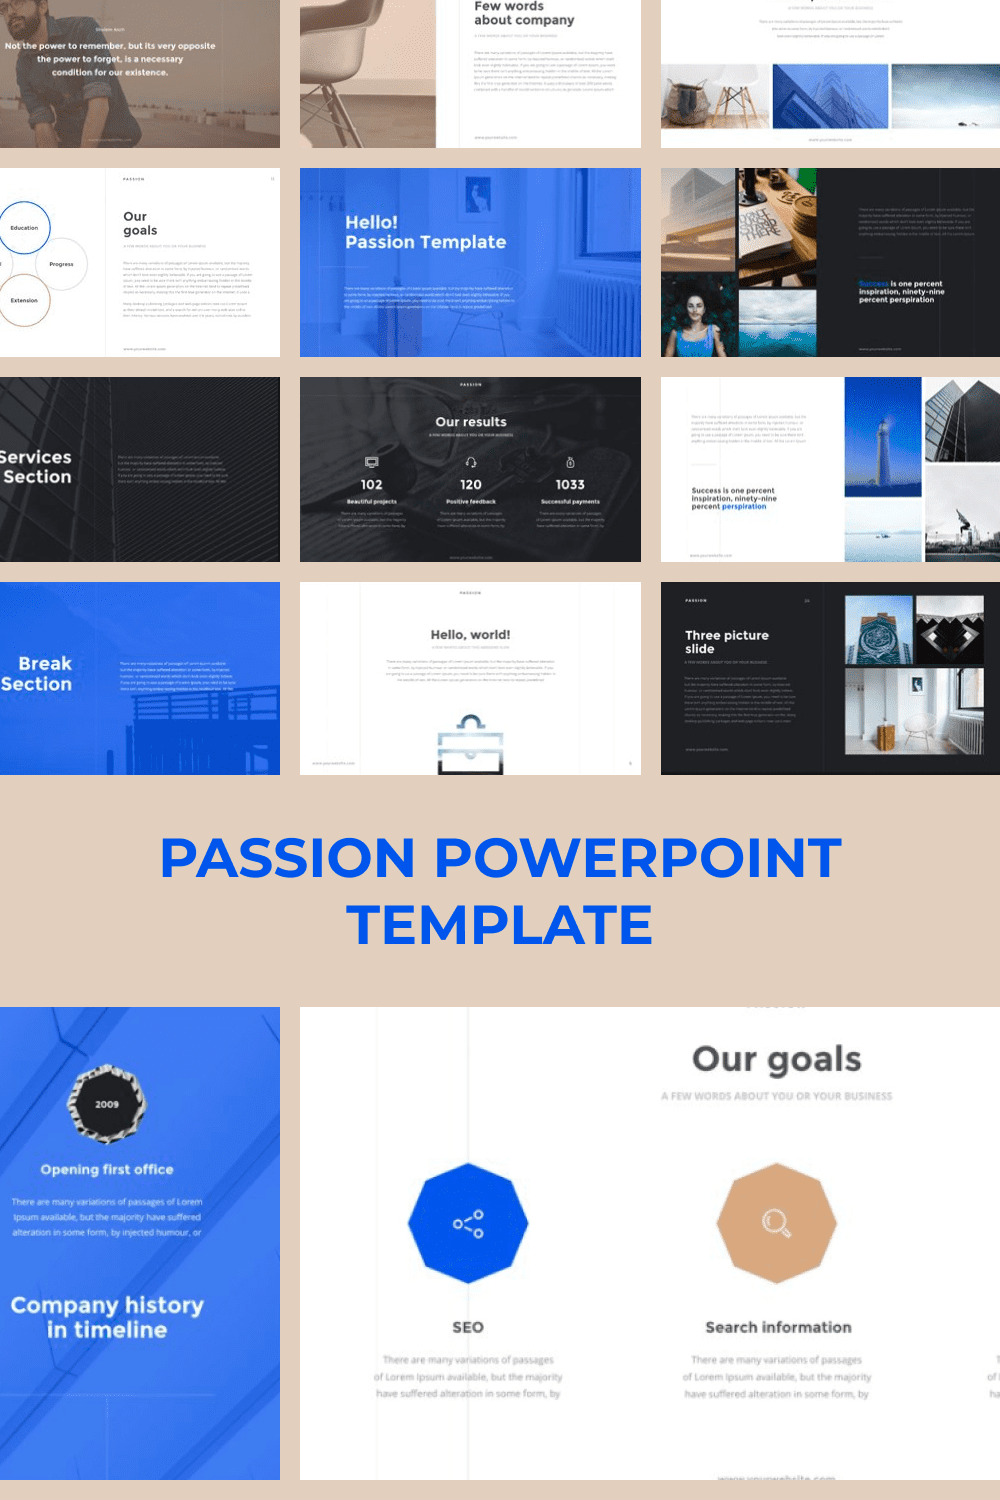 Passion PowerPoint Template - Pinterest.